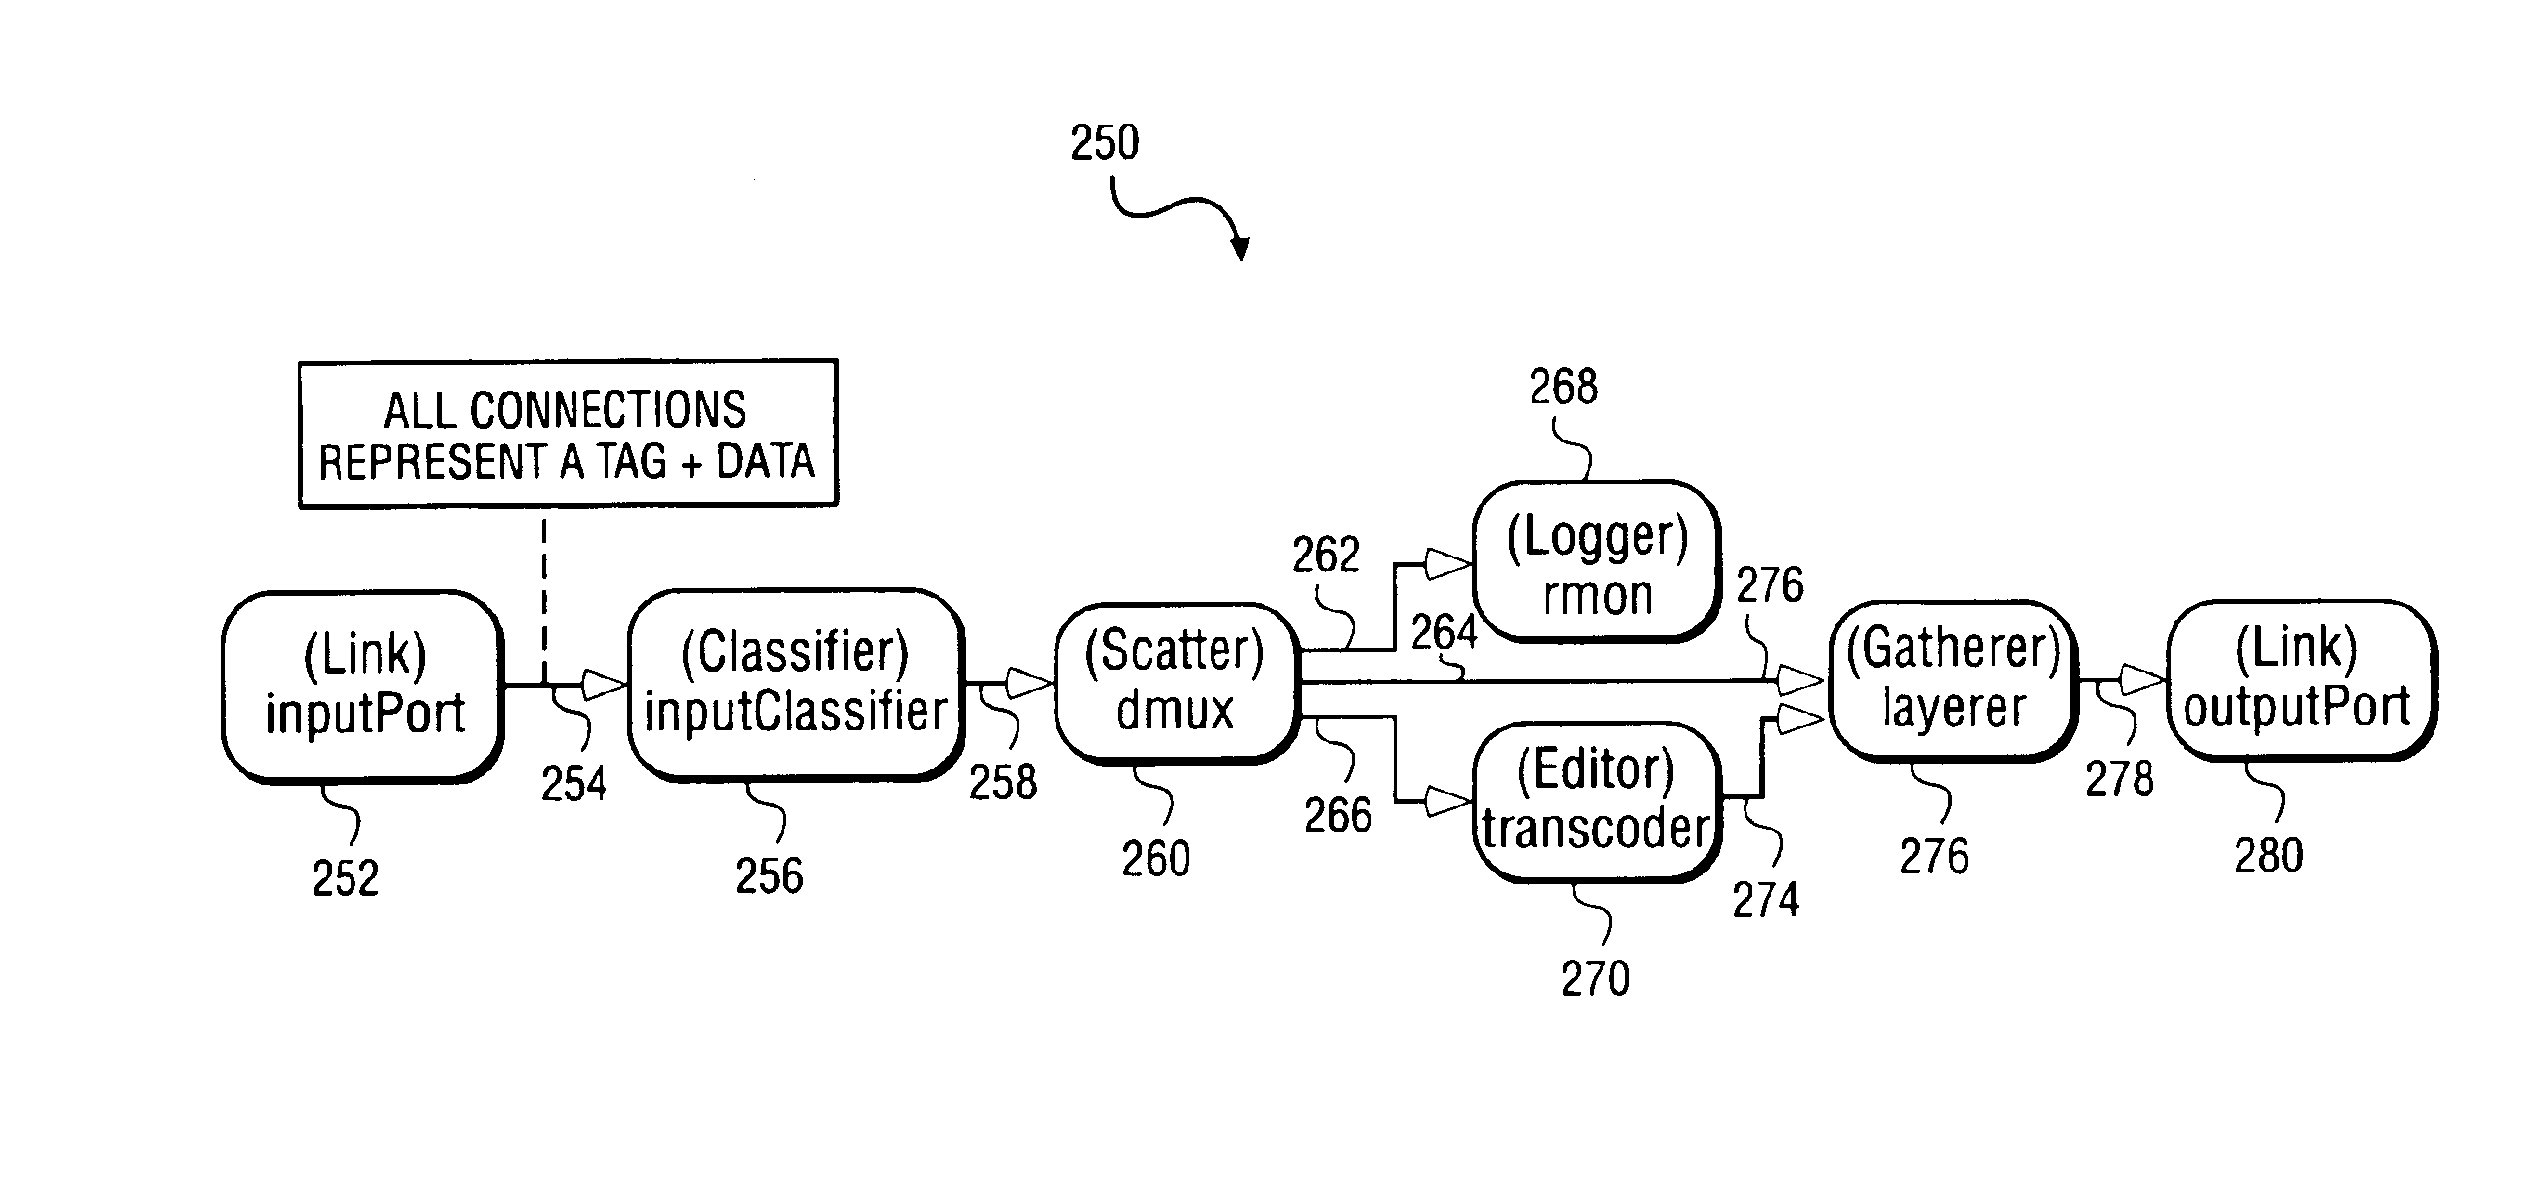 Method for representing and controlling packet data flow through packet forwarding hardware